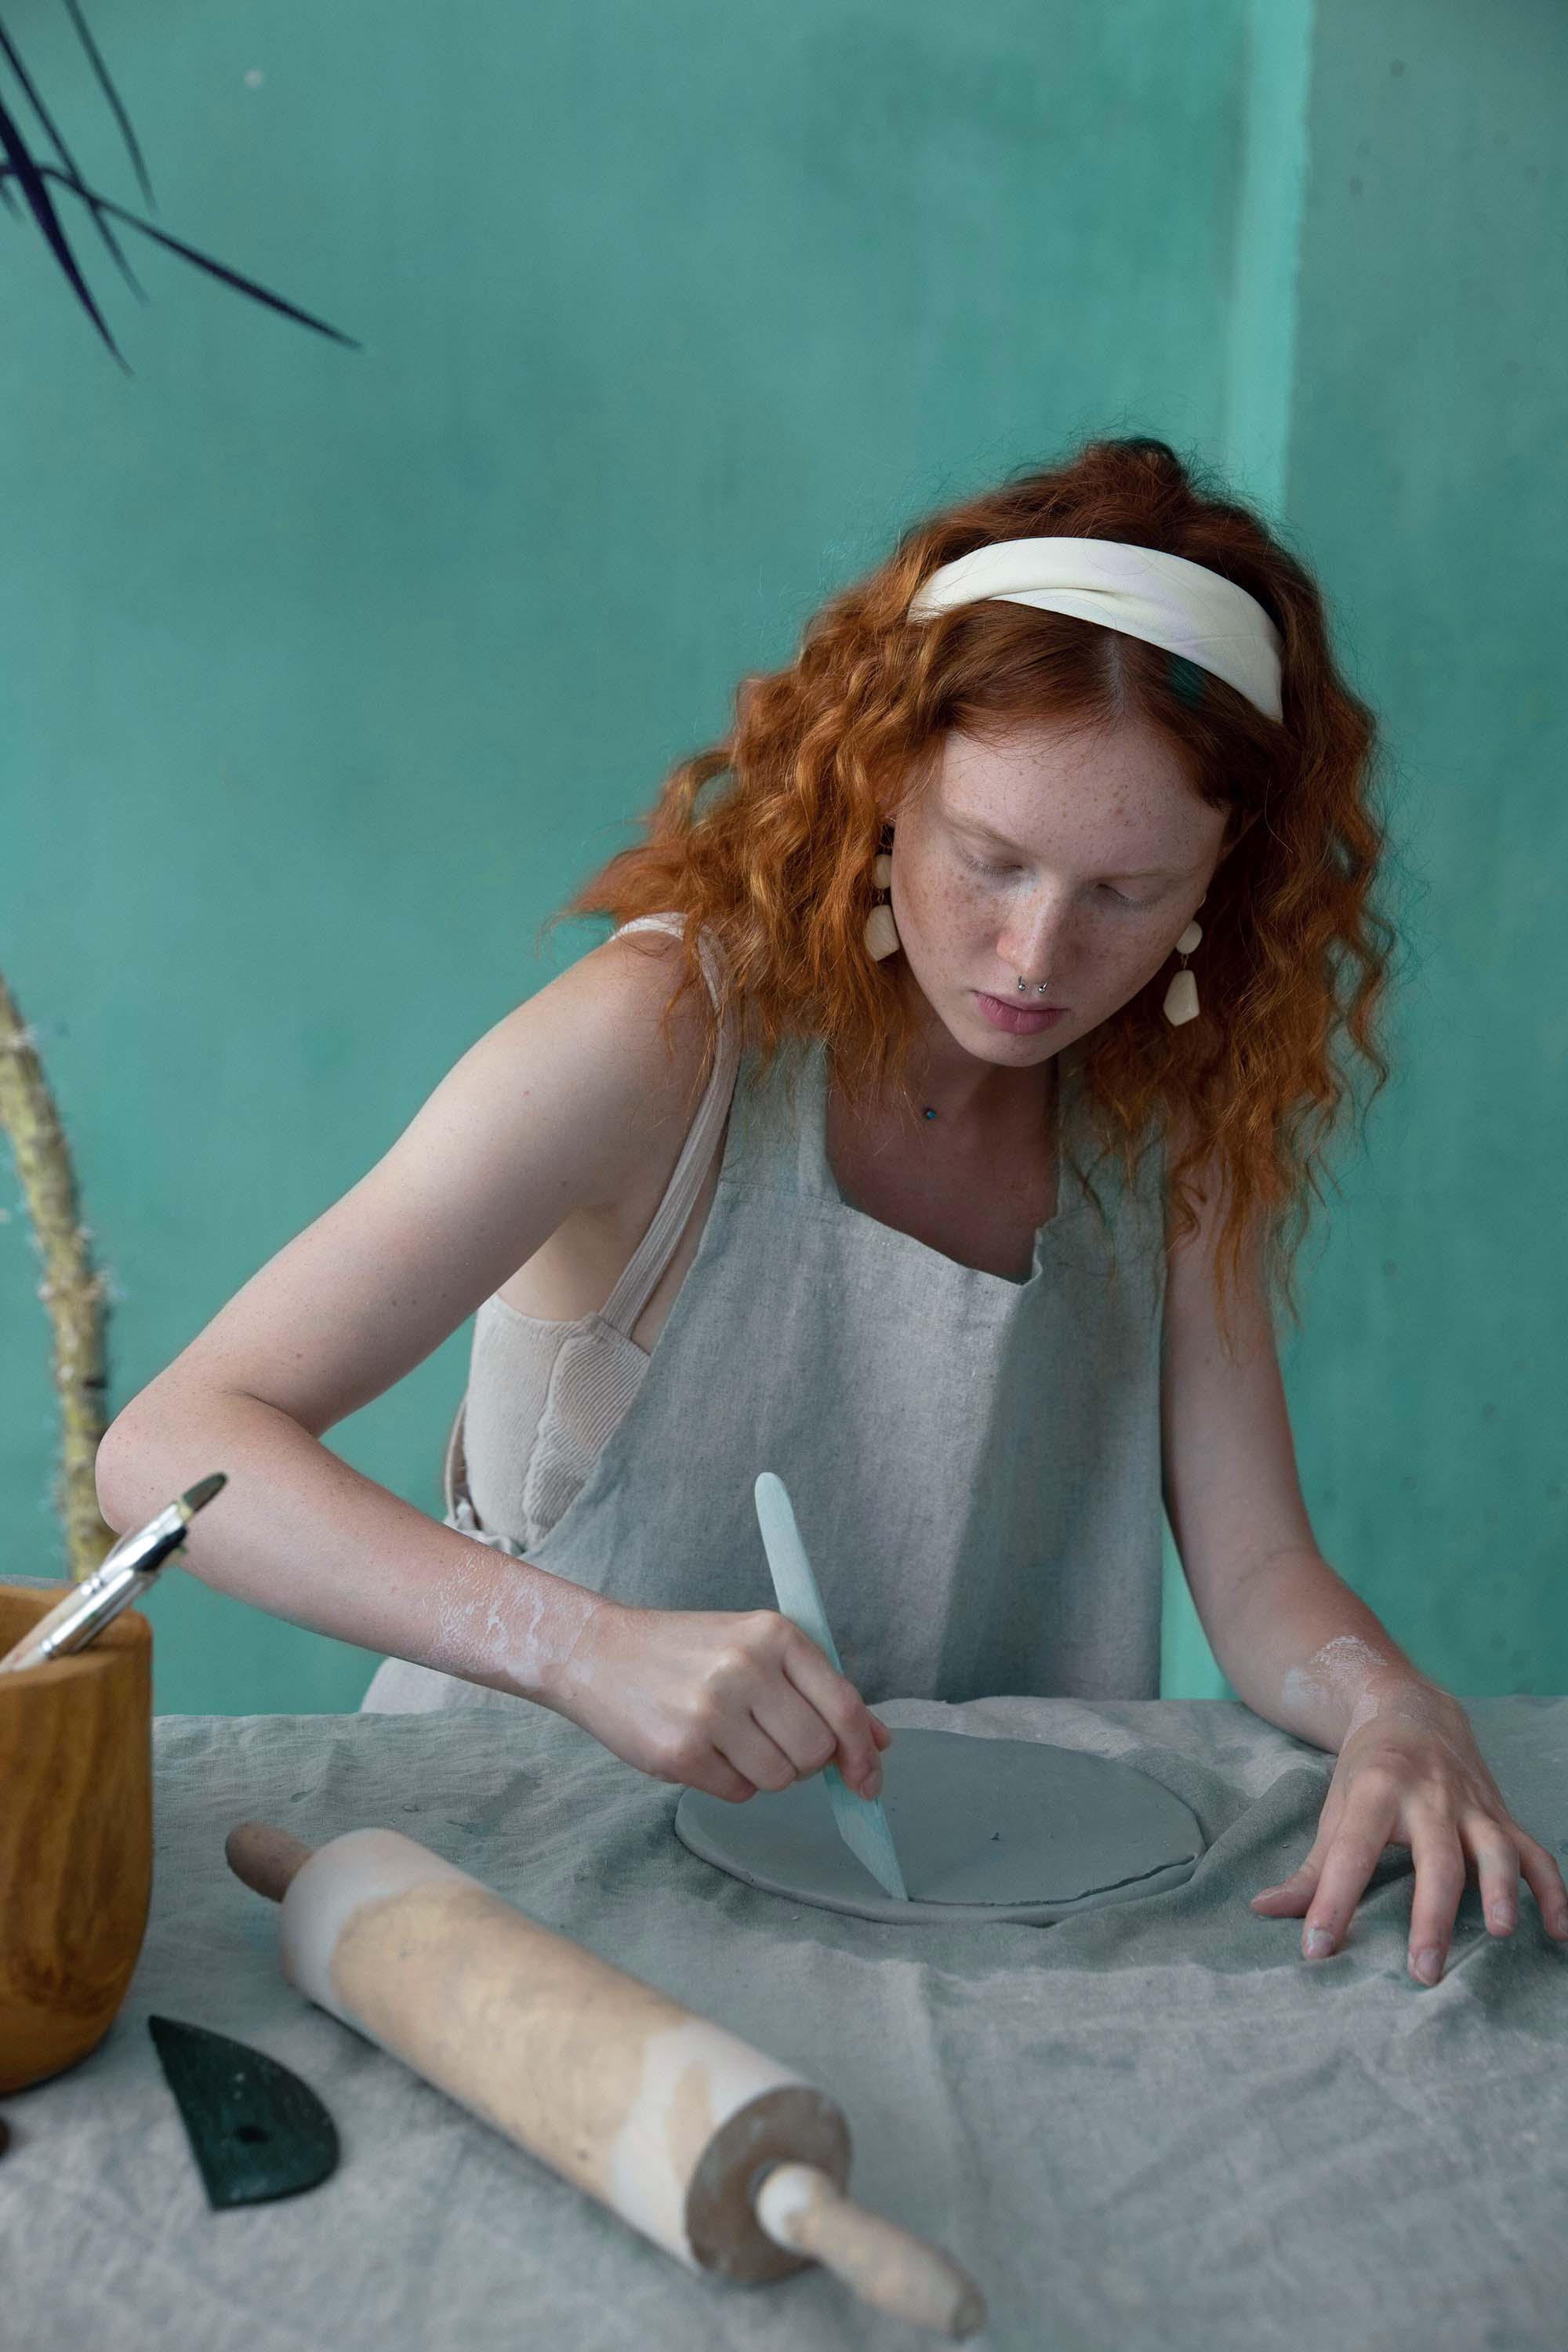 A person wearing an apron, working on a ceramics project in a studio